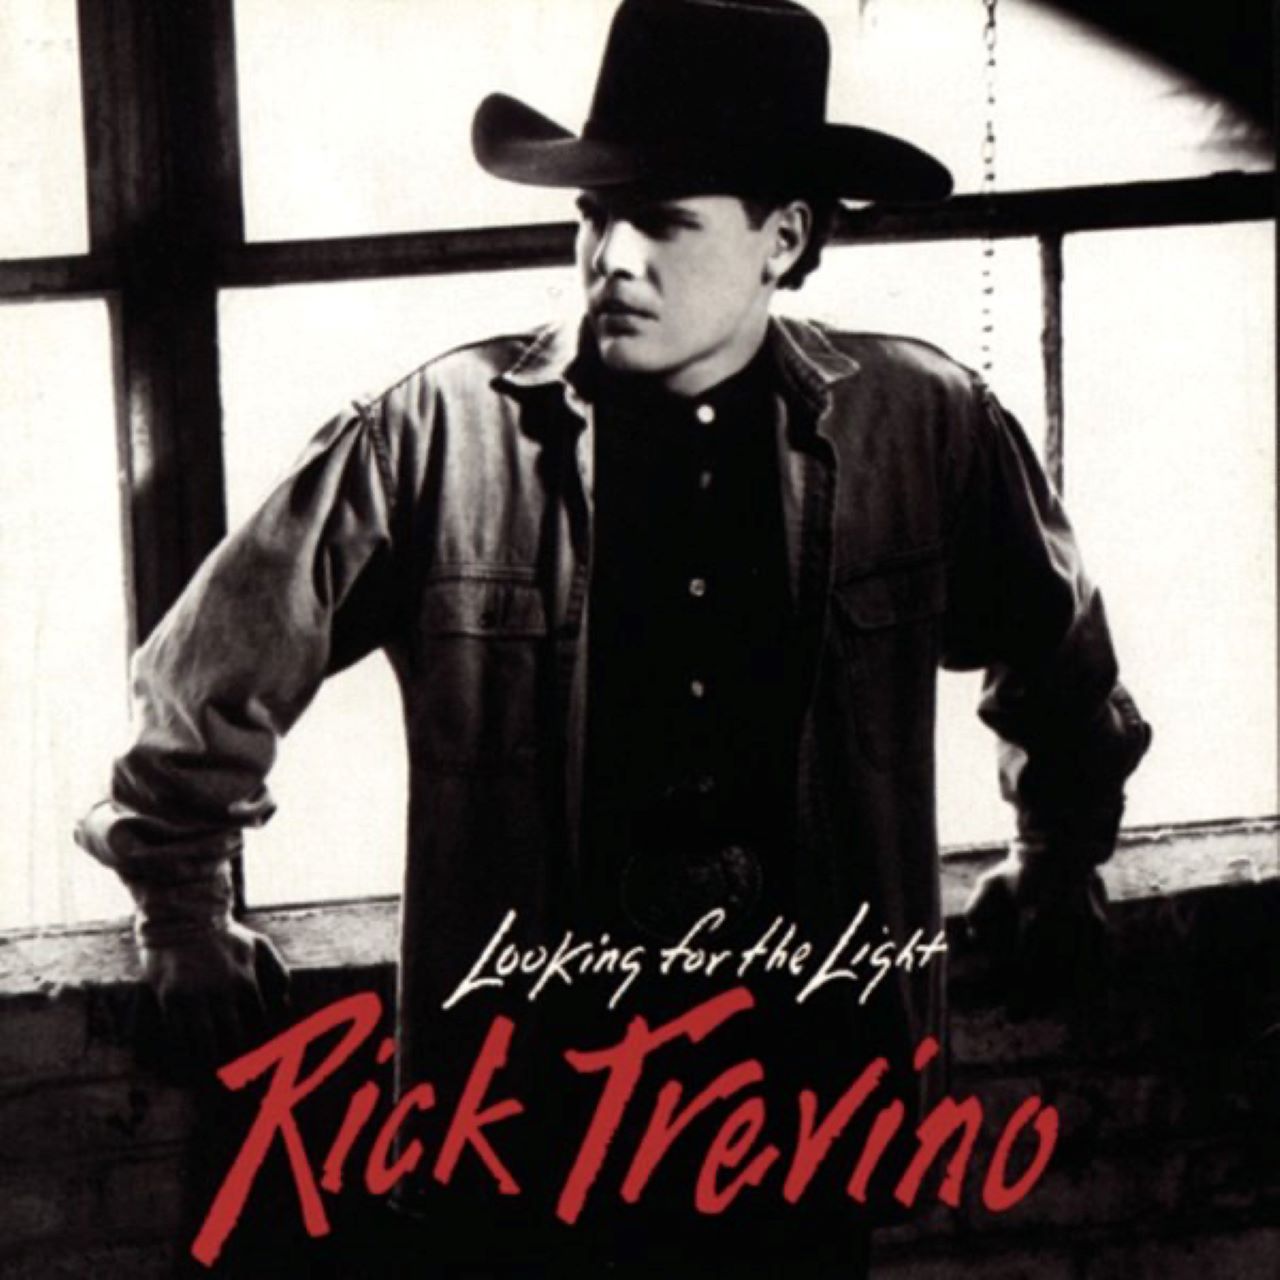 Rick Trevino - Looking For The Light cover album